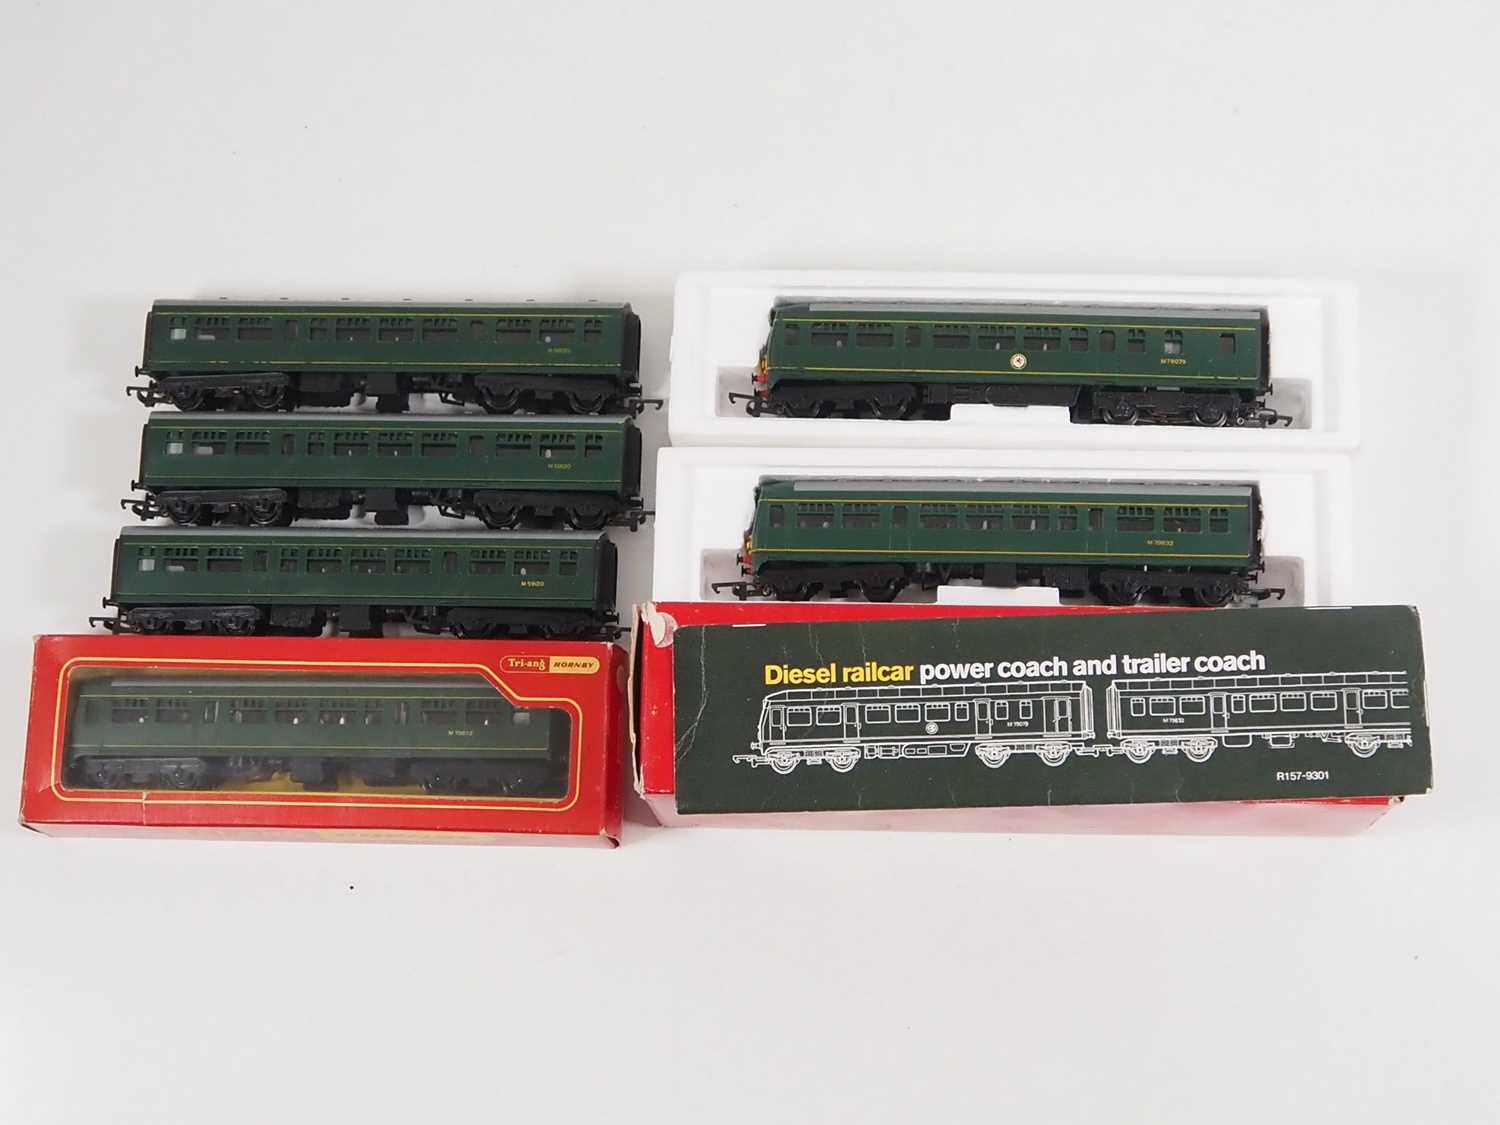 A HORNBY OO gauge 2-car diesel railcar in original box, together with a group of boxed and unboxed